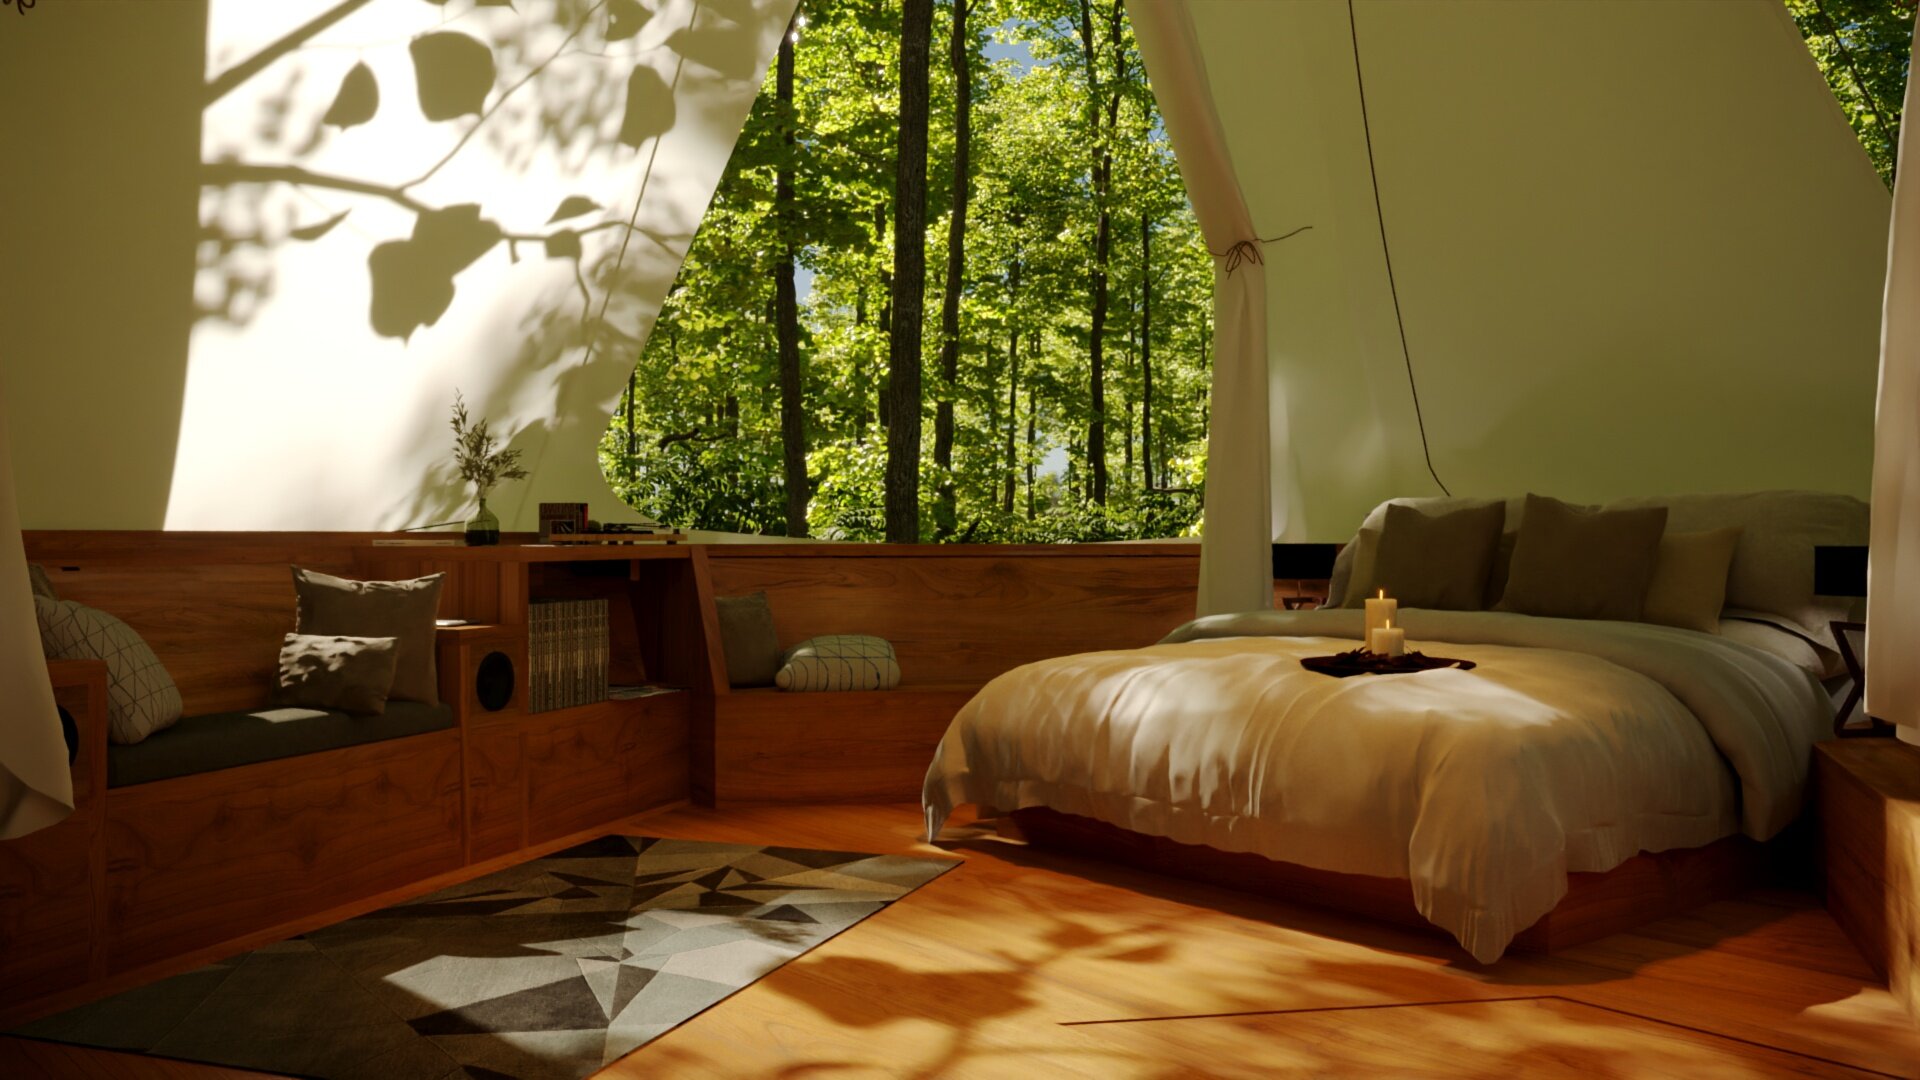 Bed in a treehouse (Copy)